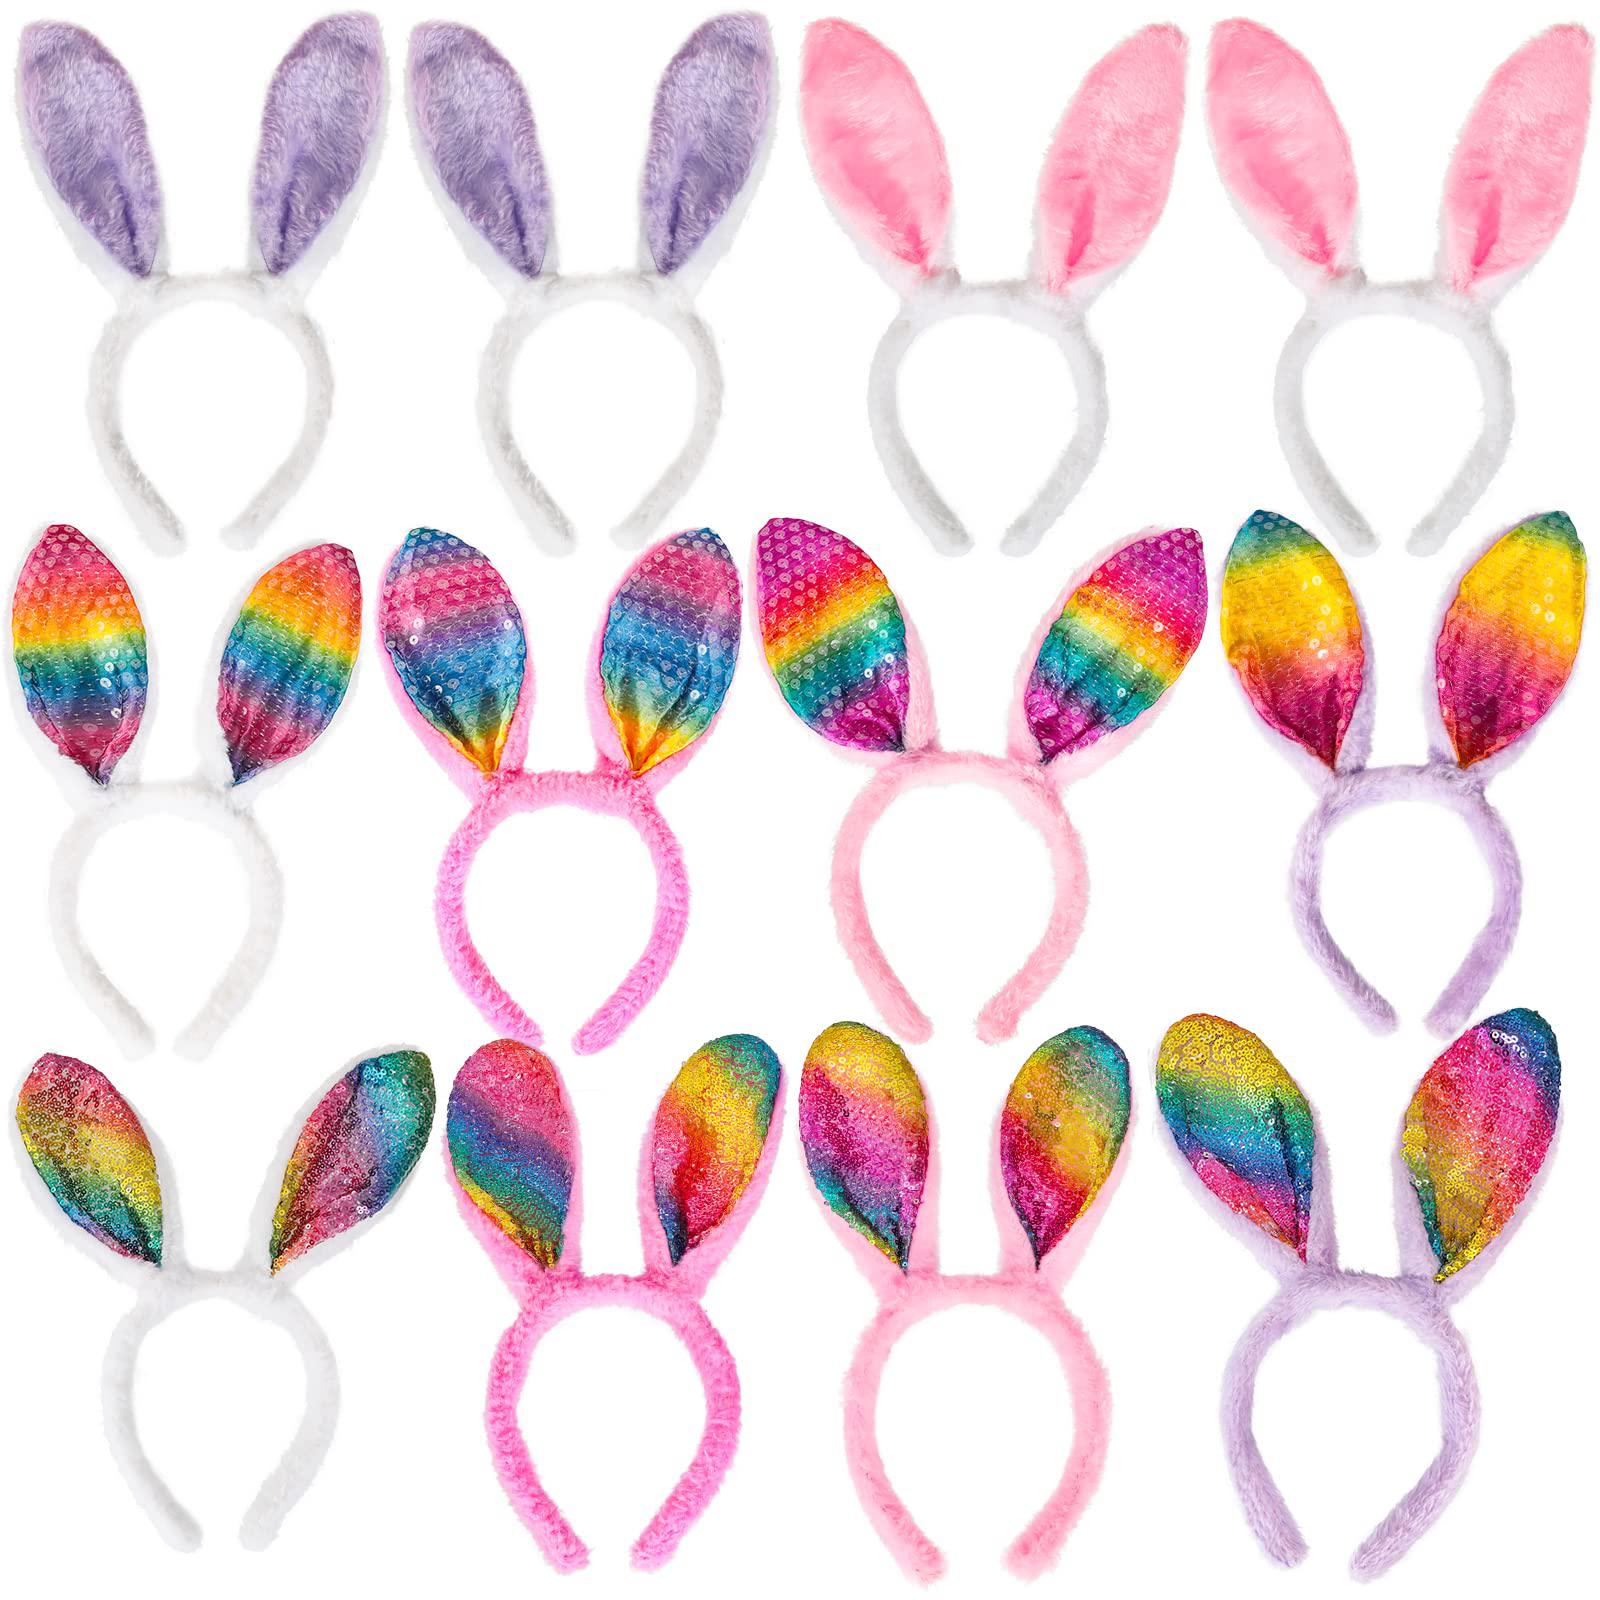 mgparty 12pcs easter bunny ears headbands colorful ear rabbit hairband easter party decoration easter birthday party favors f